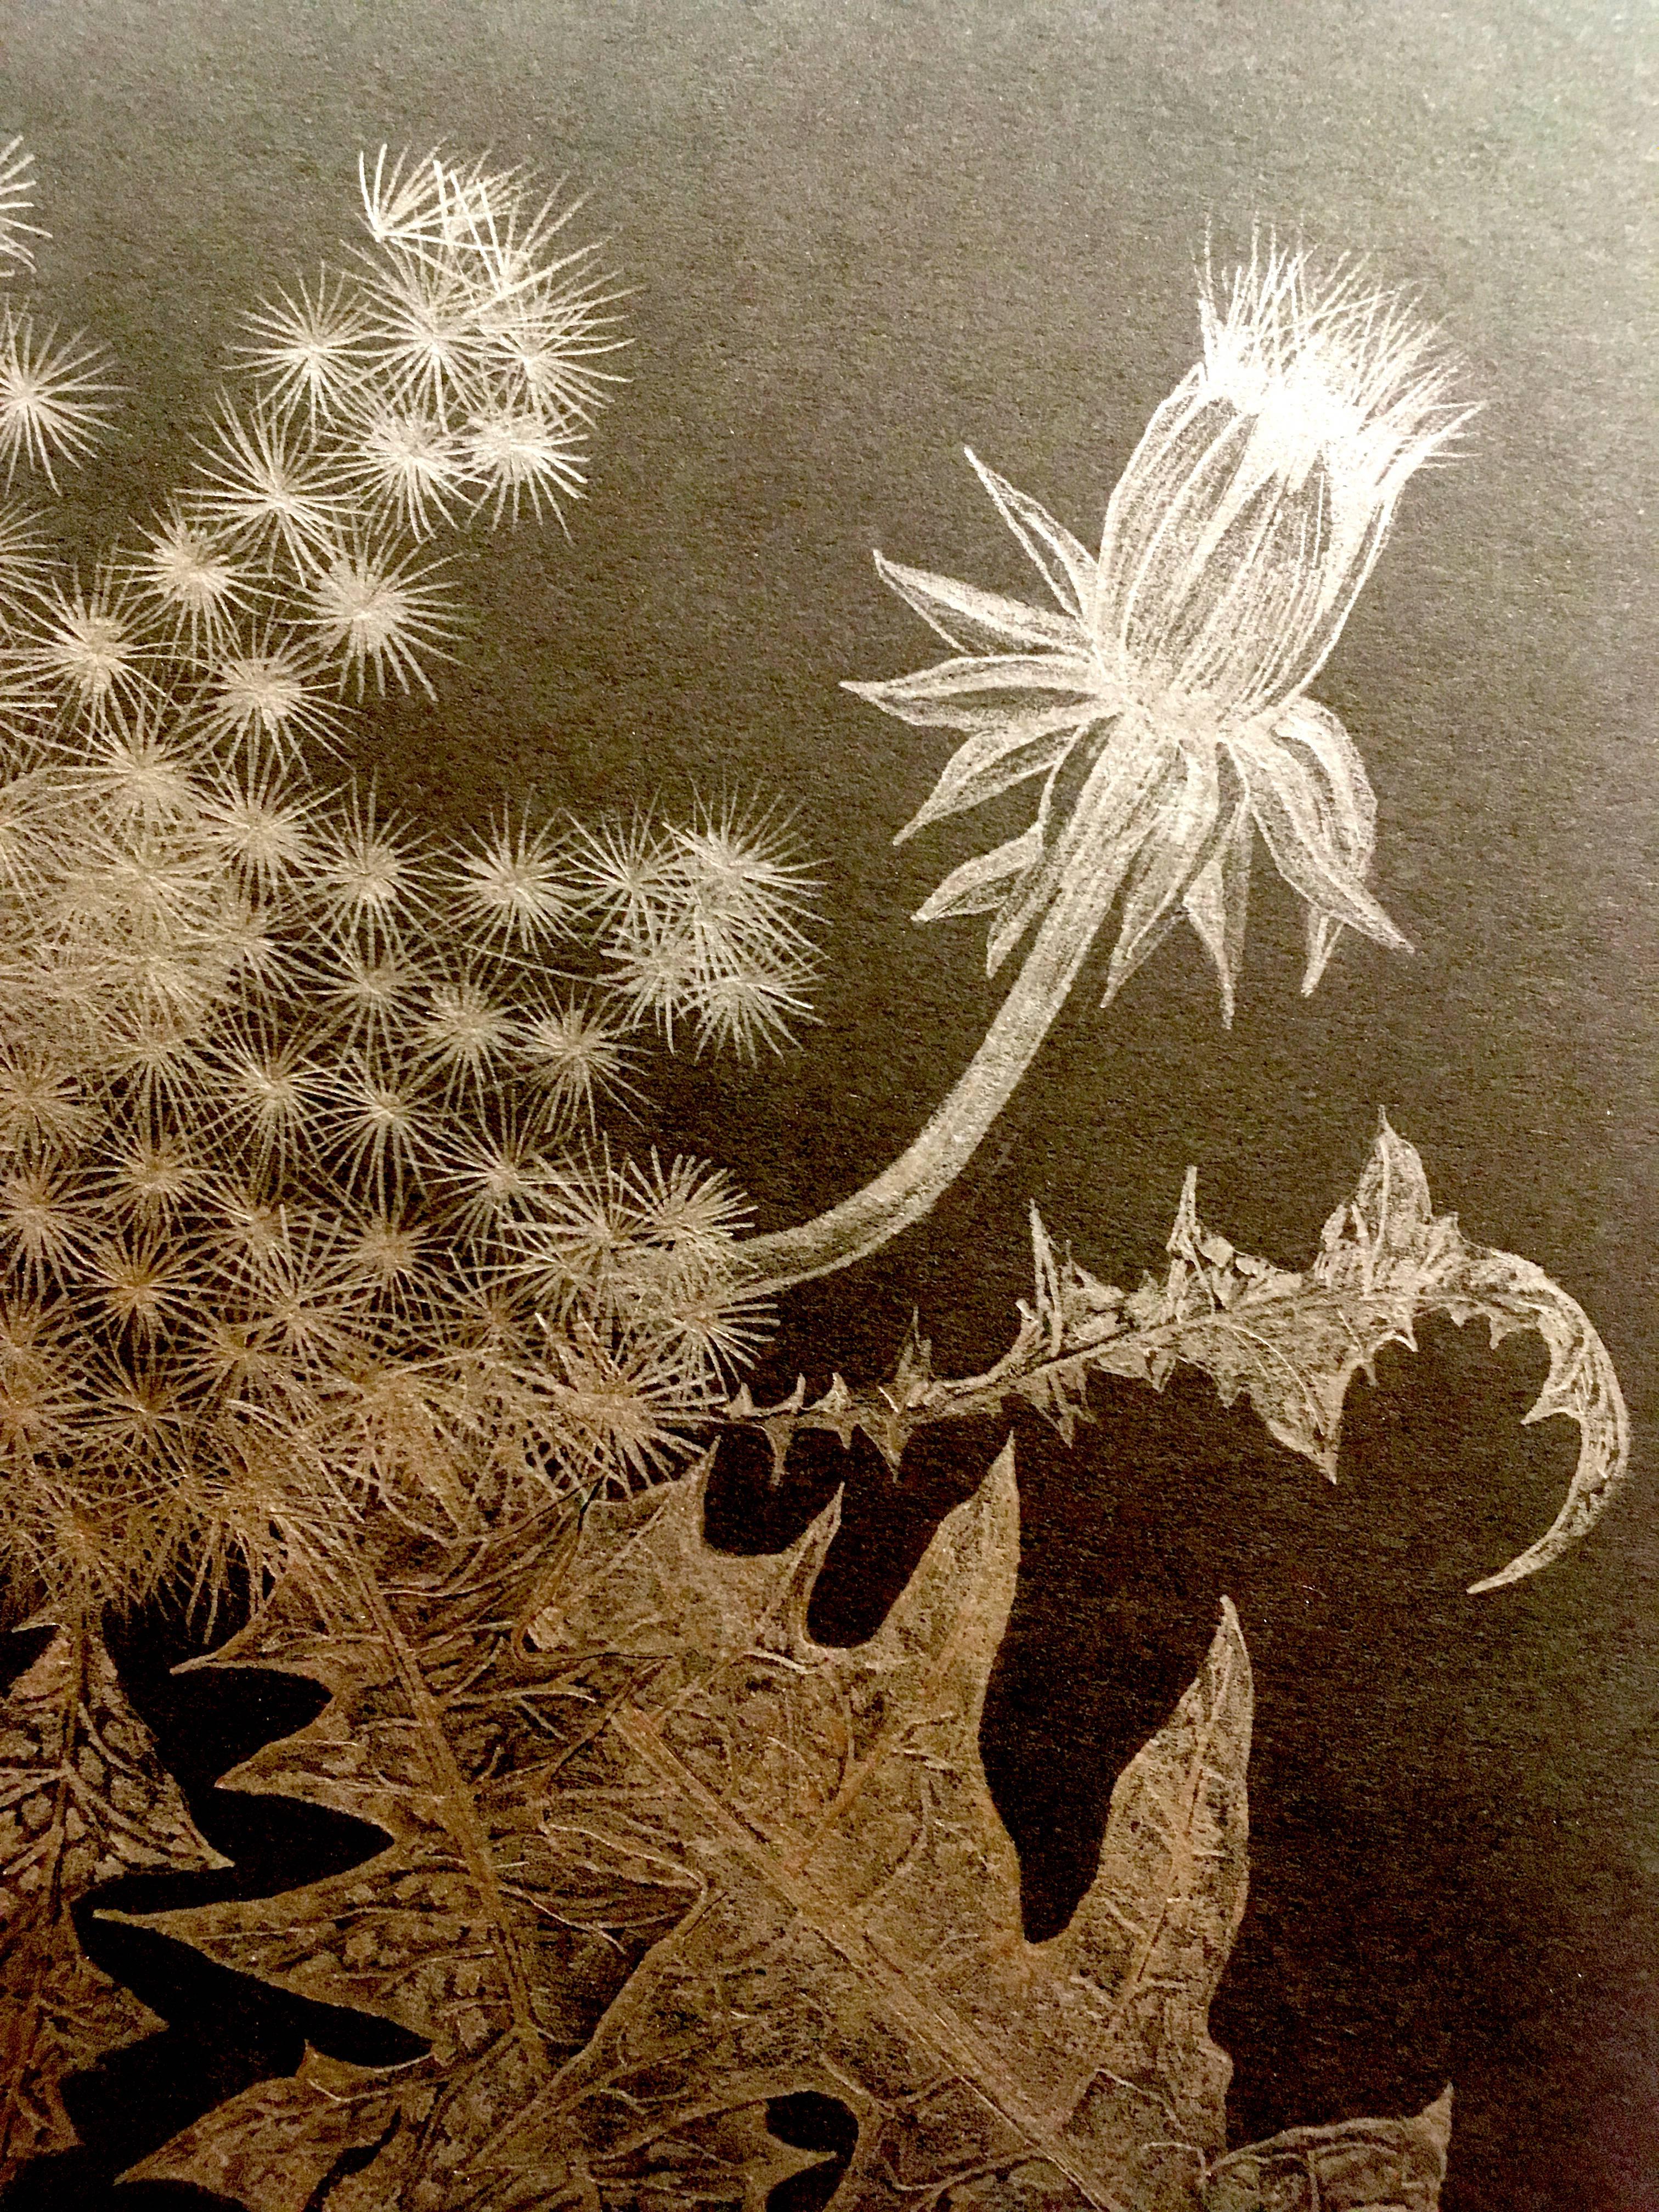 Margot Glass, Dandelion with Bud, realist graphite floral drawing on paper, 2018 3